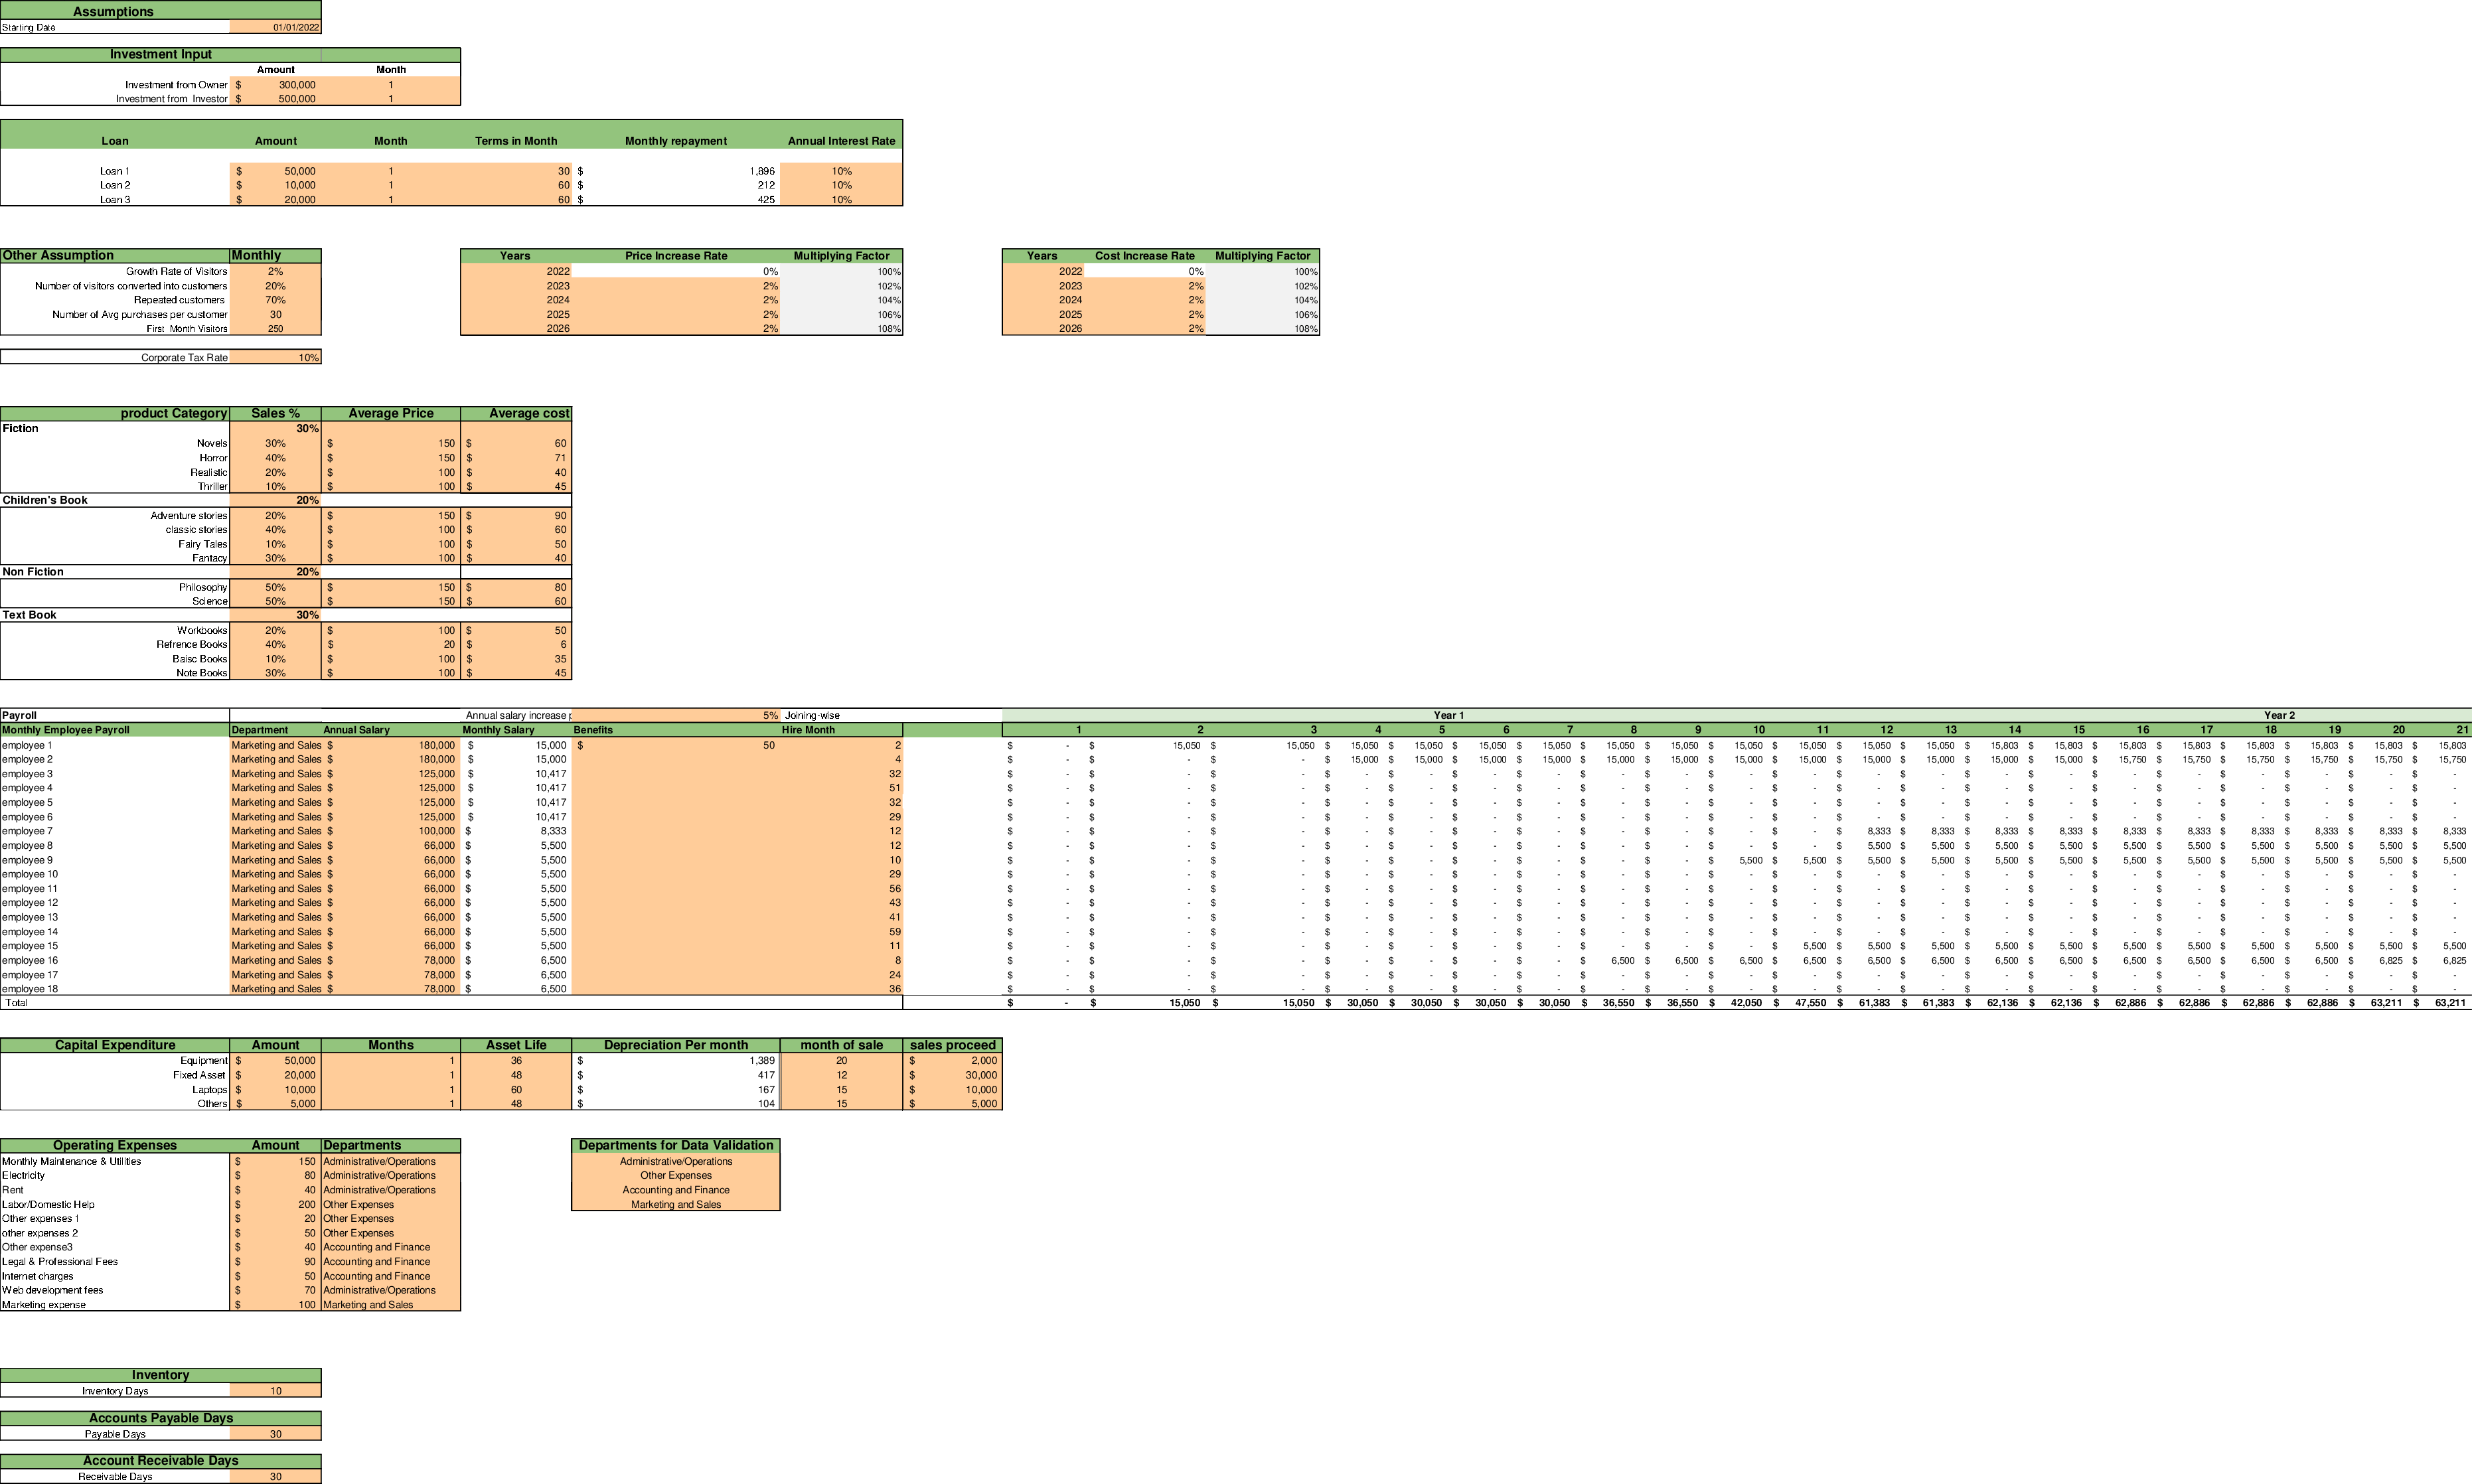 Book Store Excel Financial Model